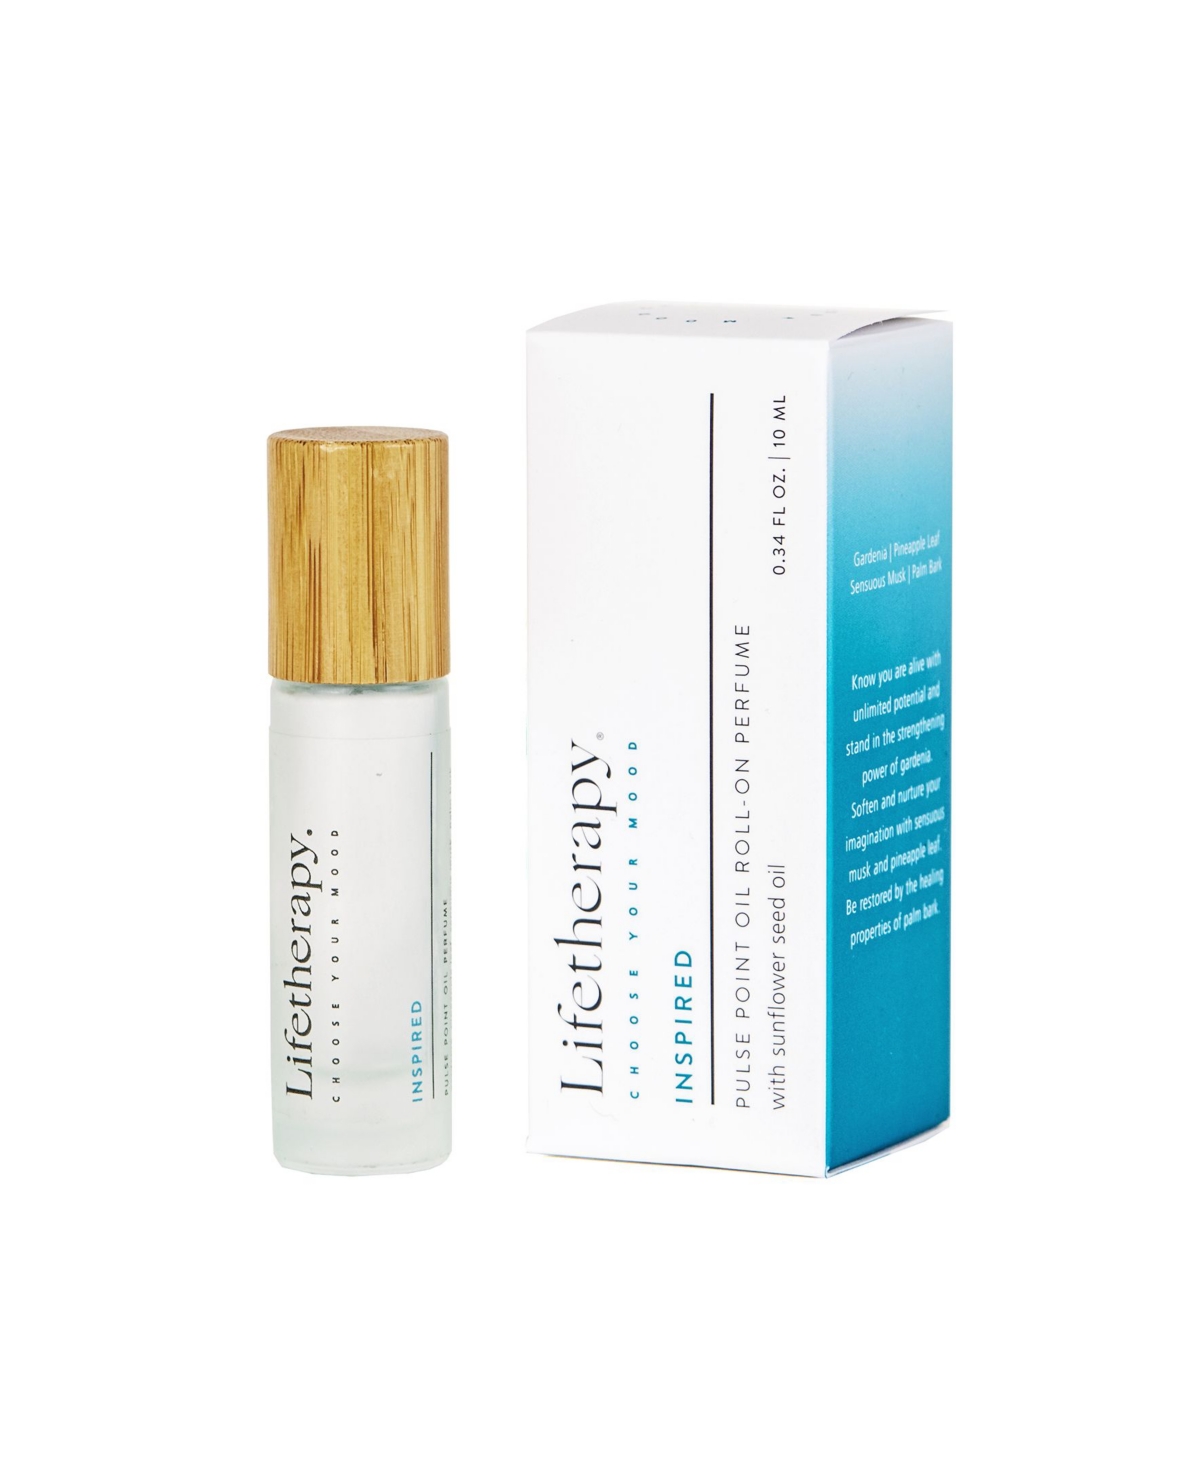 Lifetherapy Inspired Pulse Point Oil Roll-On Perfume, 0.34 oz